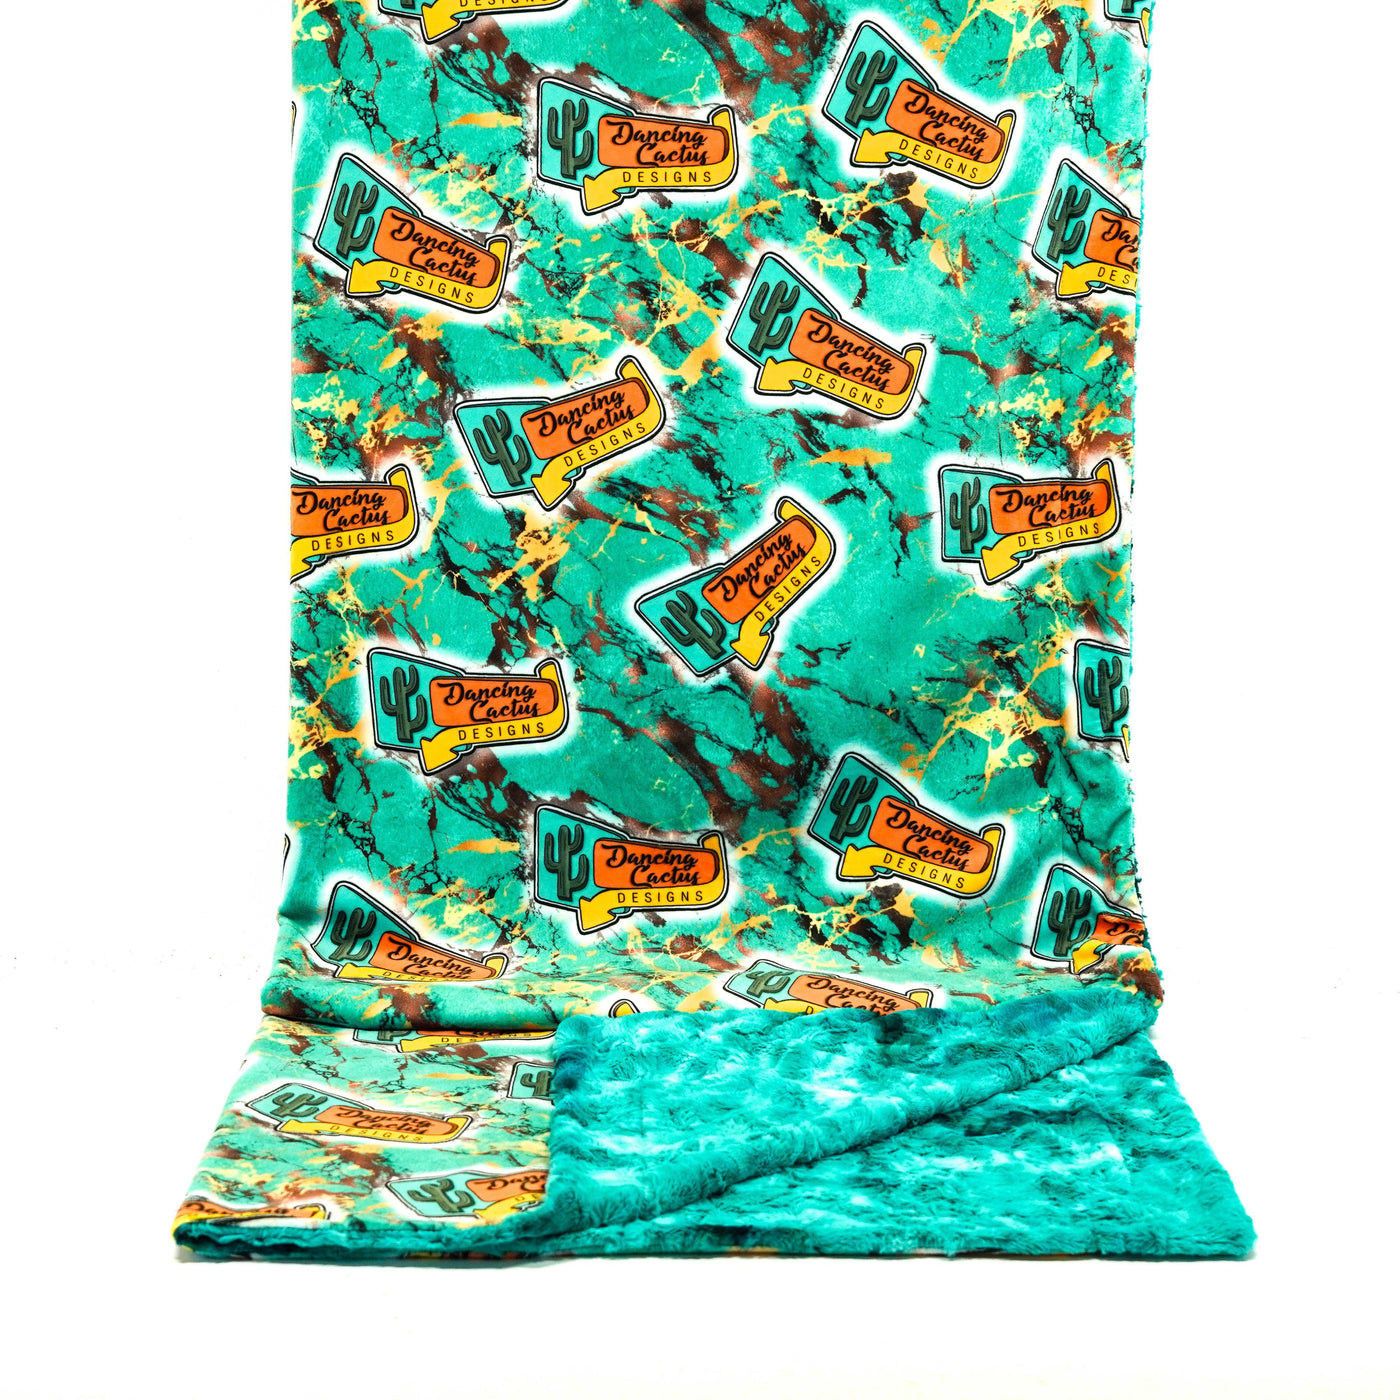 Adult Sized Minky Blanket - Breeze Galaxy w/ Turquoise Splash-Adult Sized Minky Blanket-Western-Cowhide-Bags-Handmade-Products-Gifts-Dancing Cactus Designs